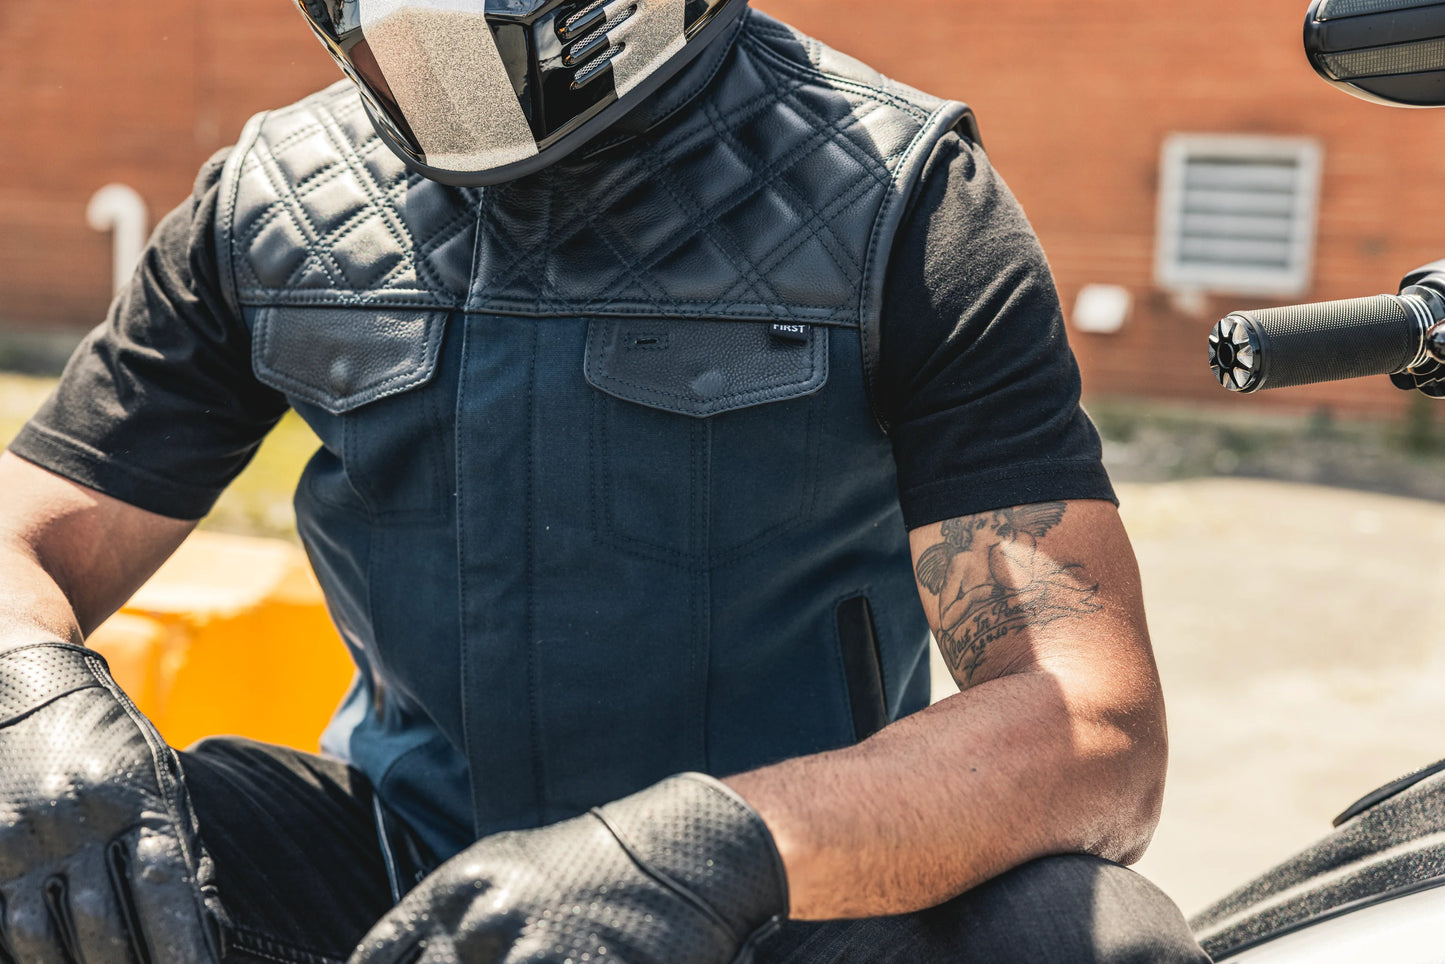 Close-Up: Motorcycle Rider in Stylish Club Vest, Concealed Carry.